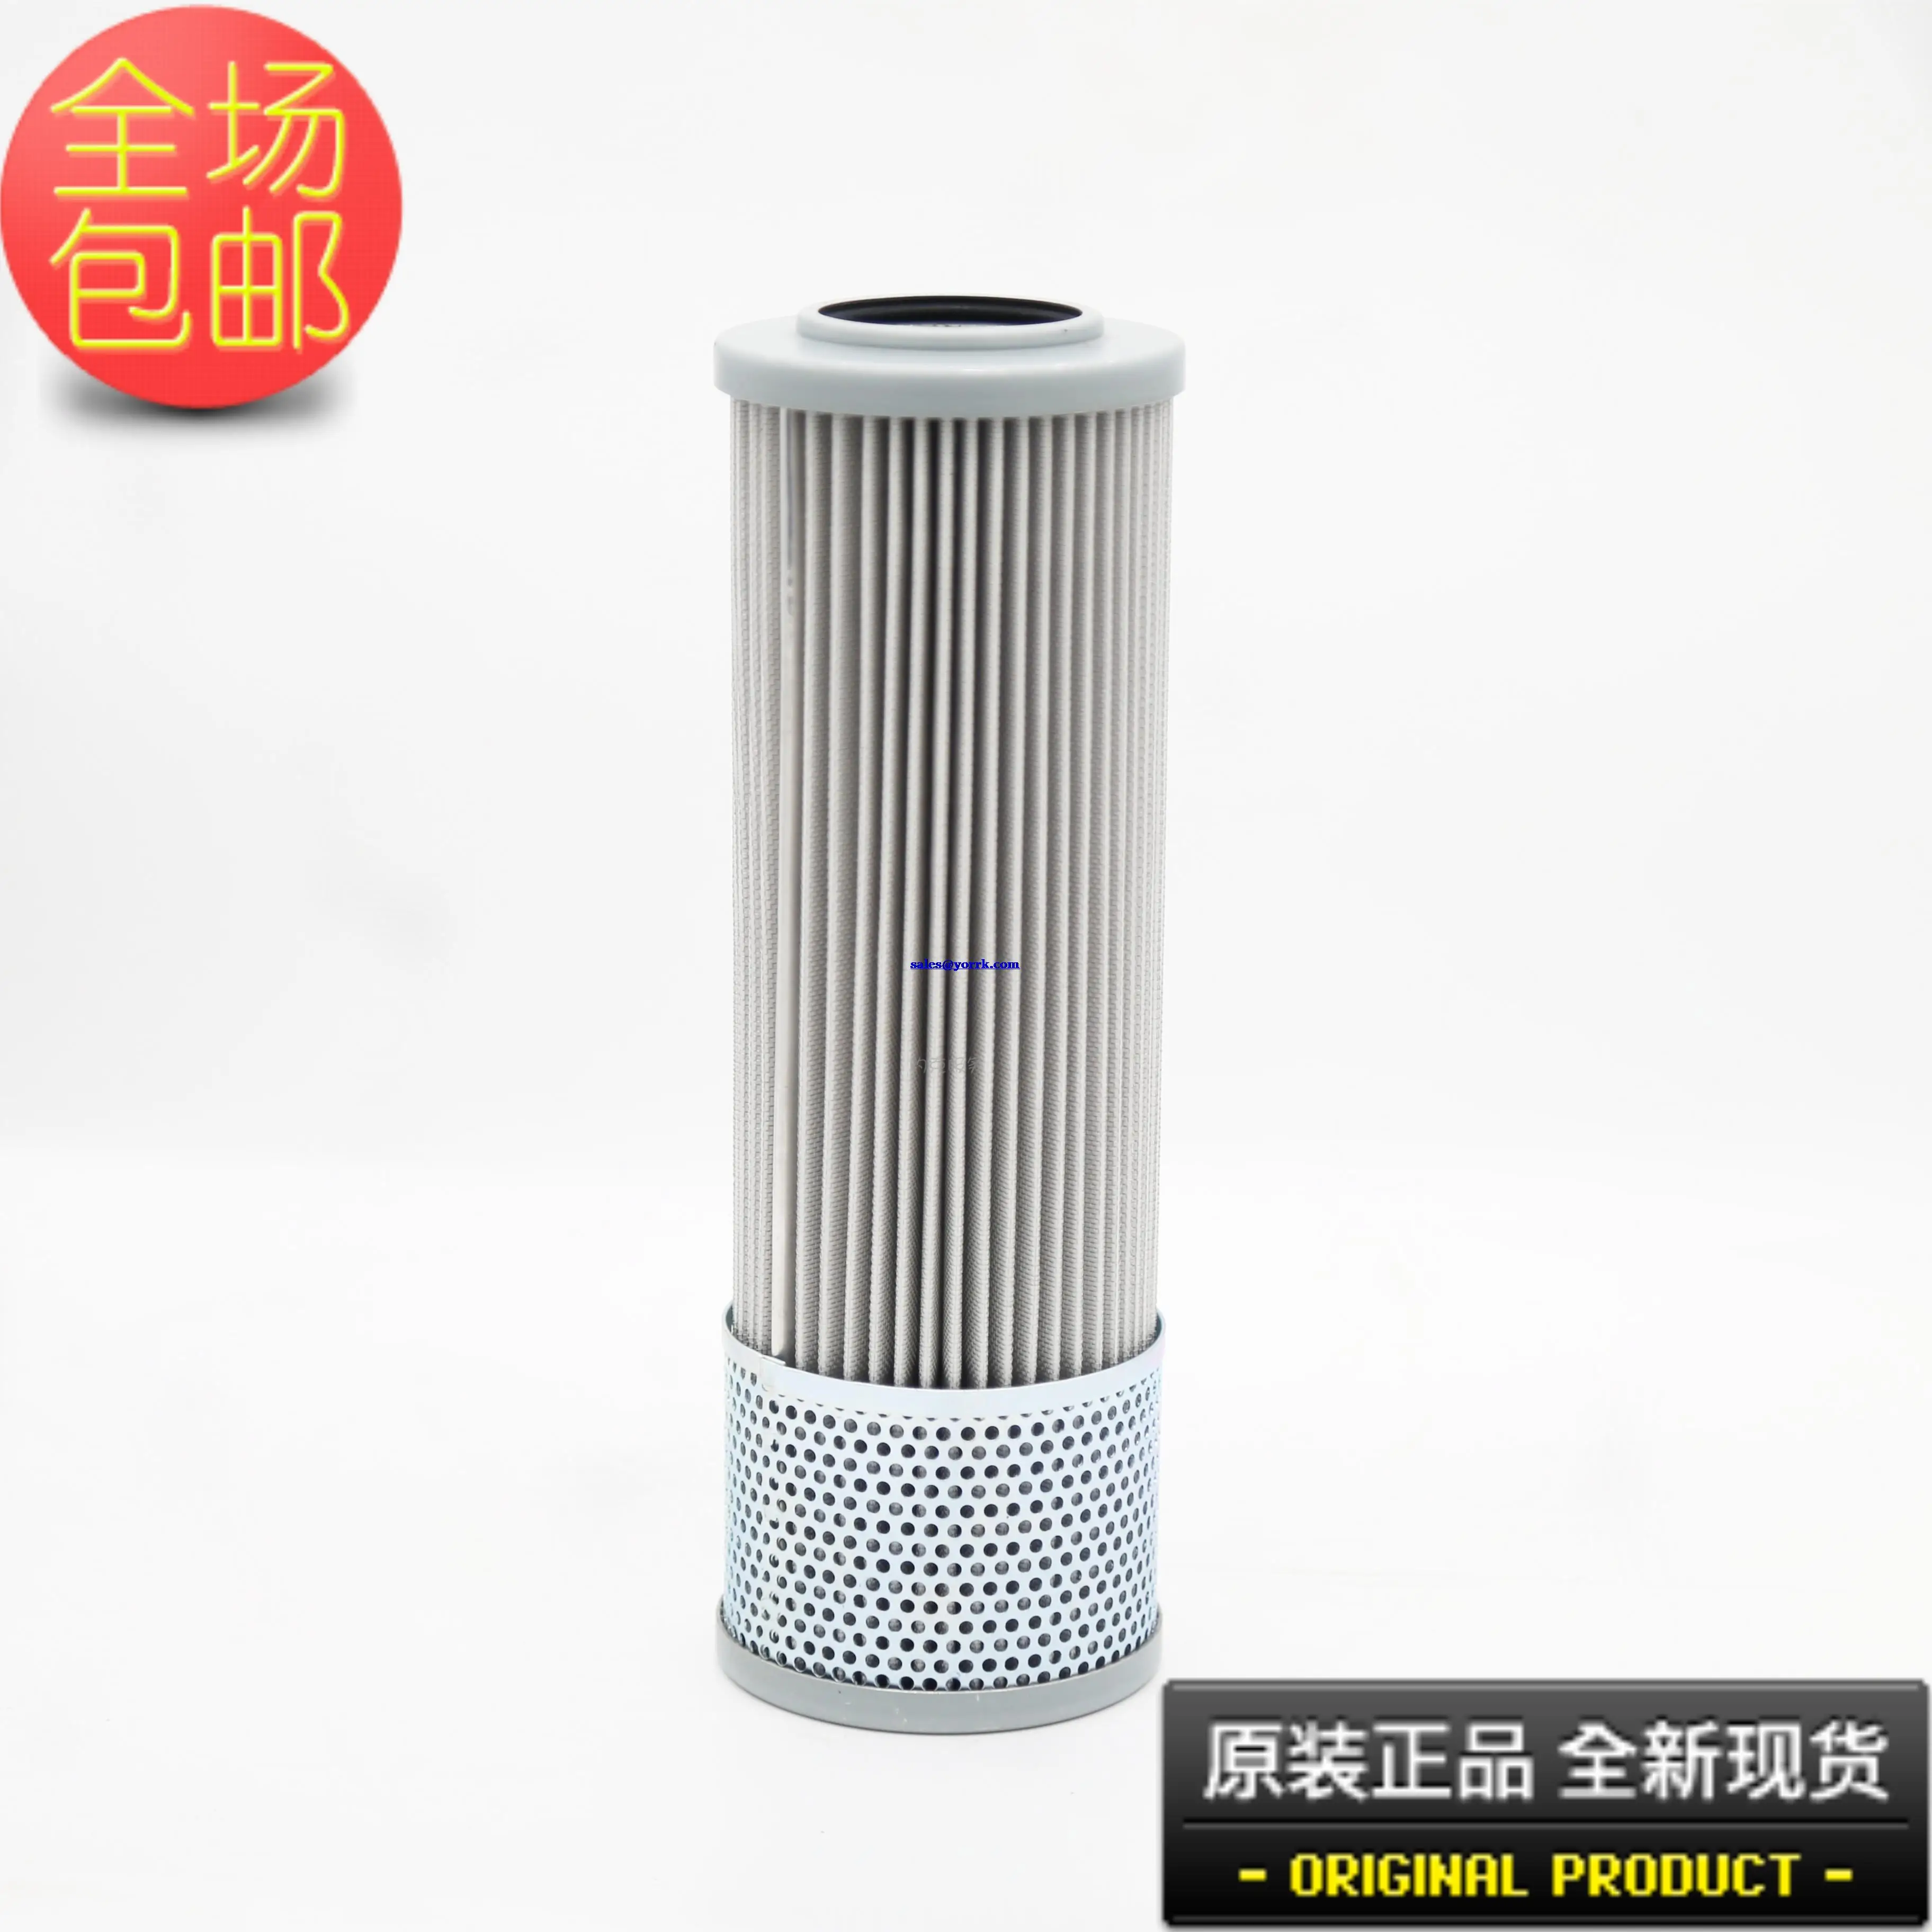 

M332115201 screw compressor oil filter core closed filter metal mesh cylindrical filter